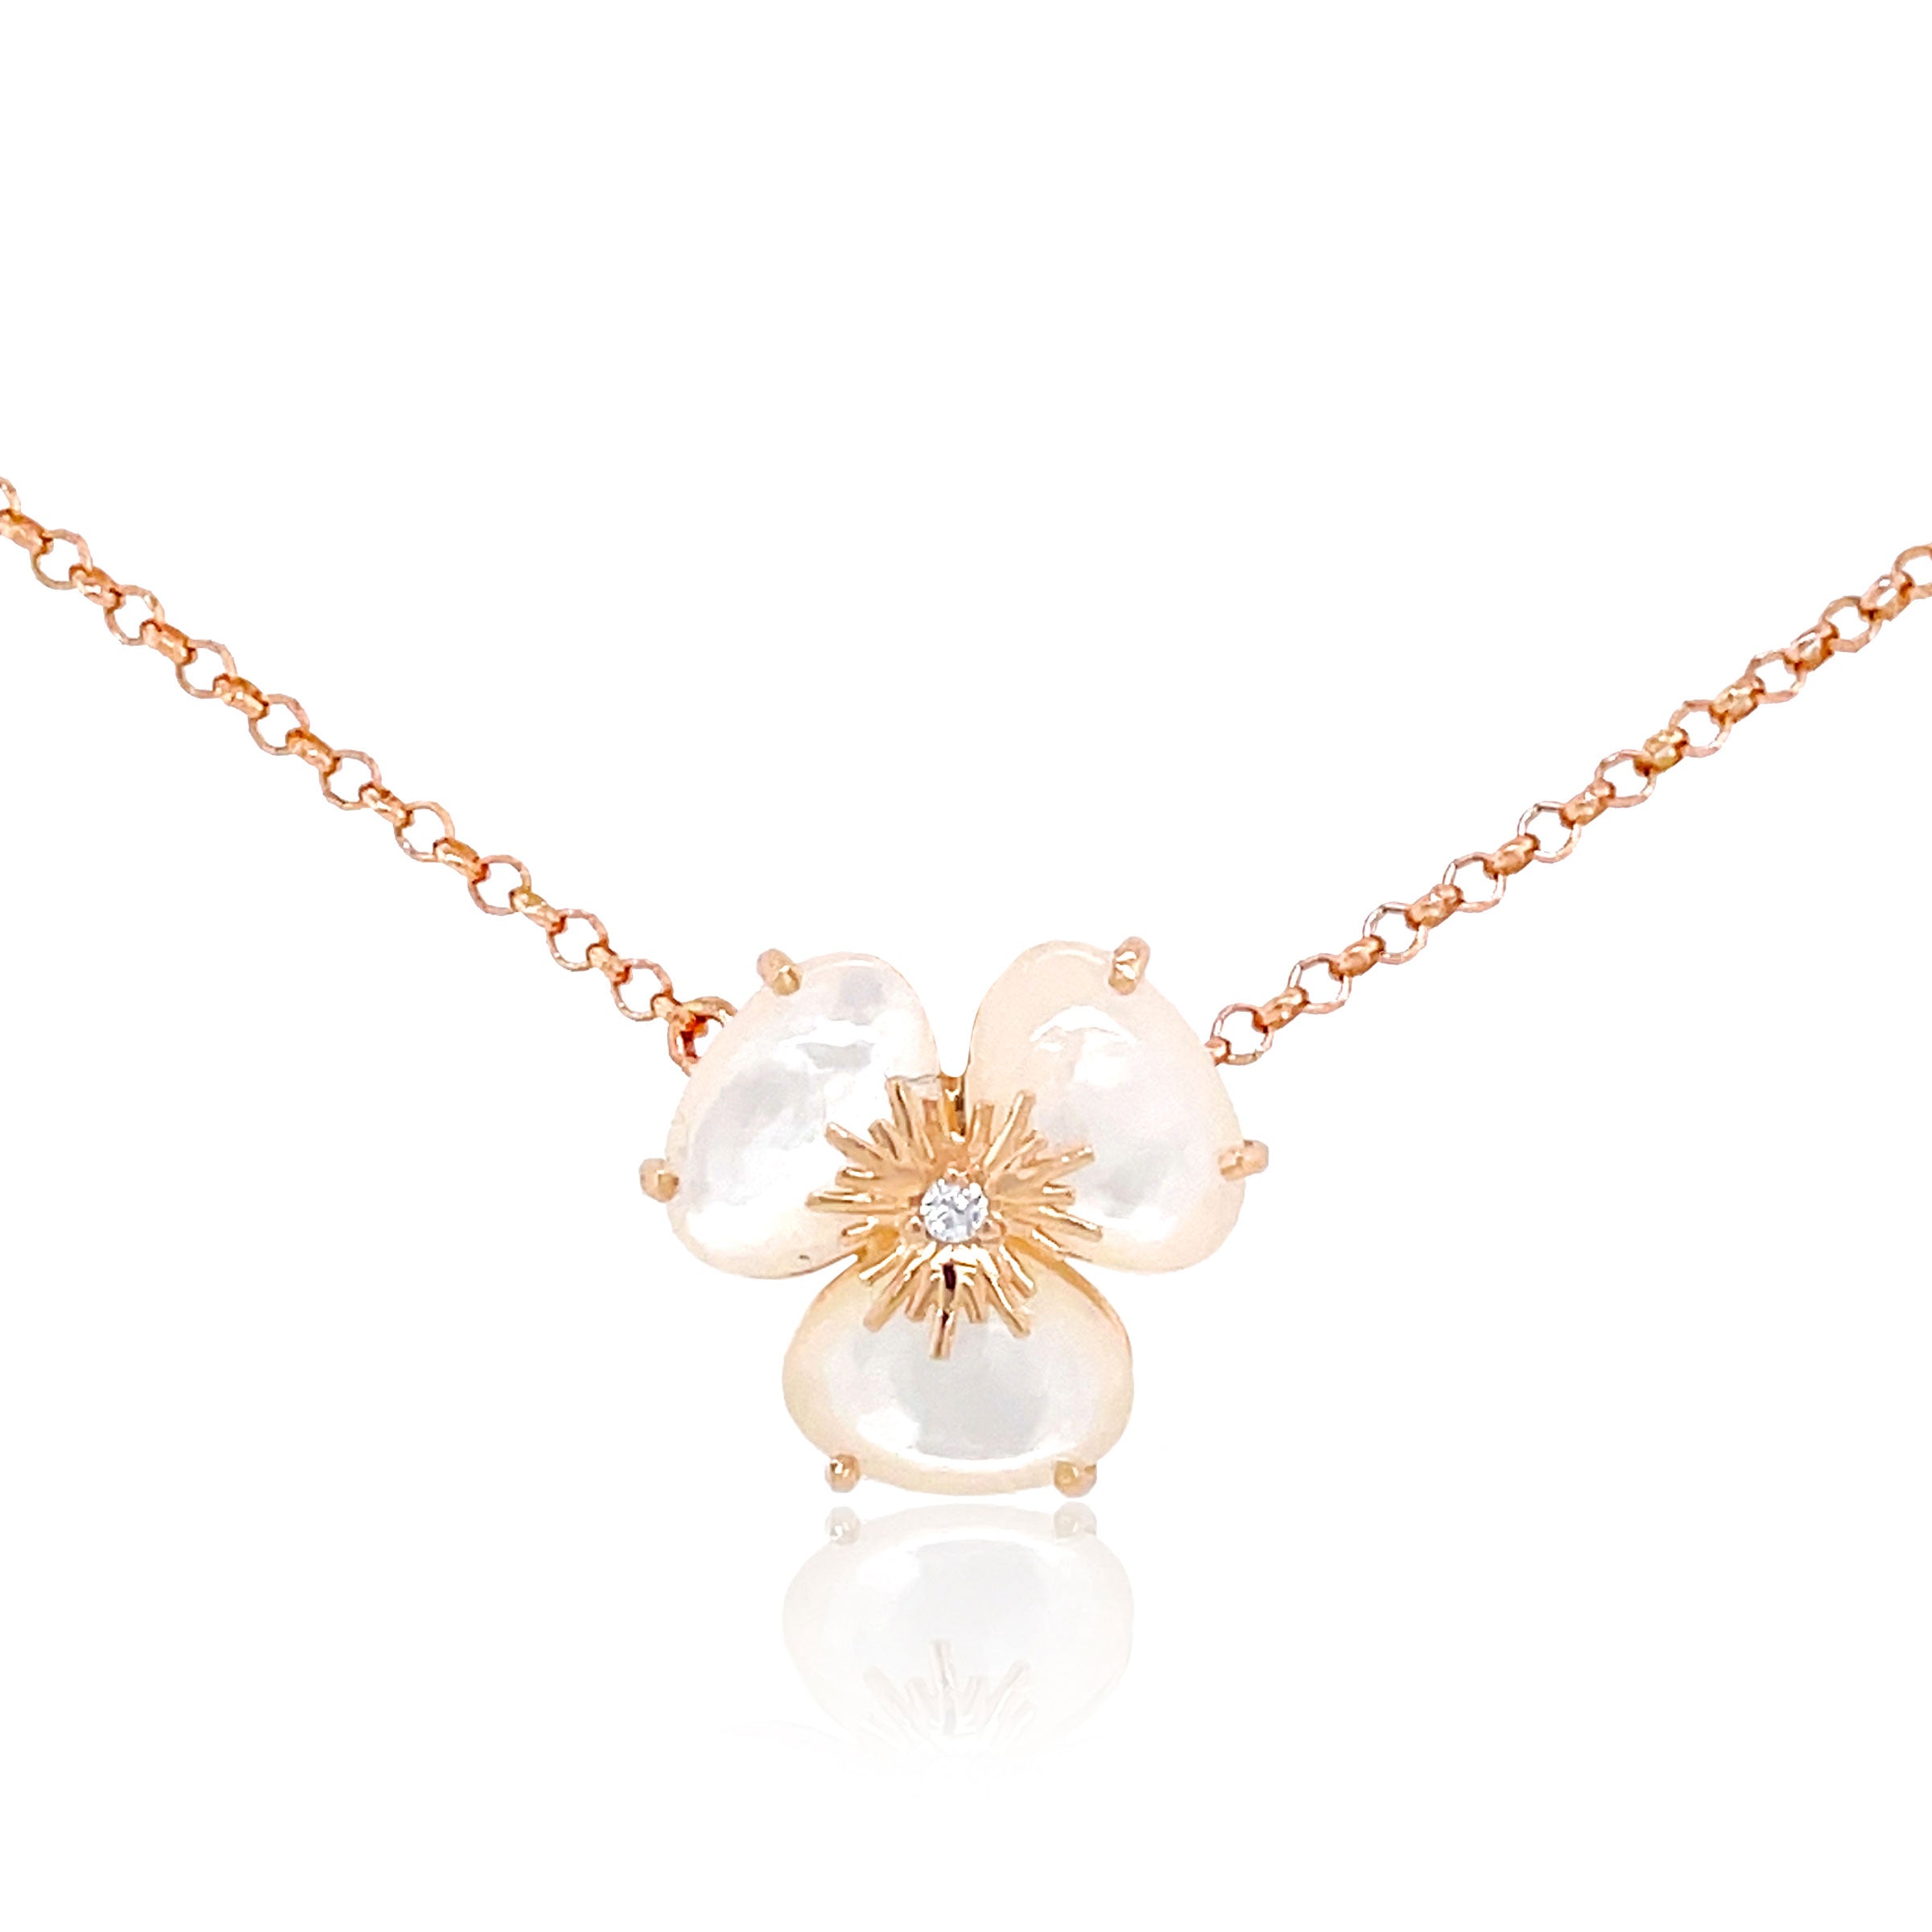 Premium Photo | A gold necklace with a flower design on it